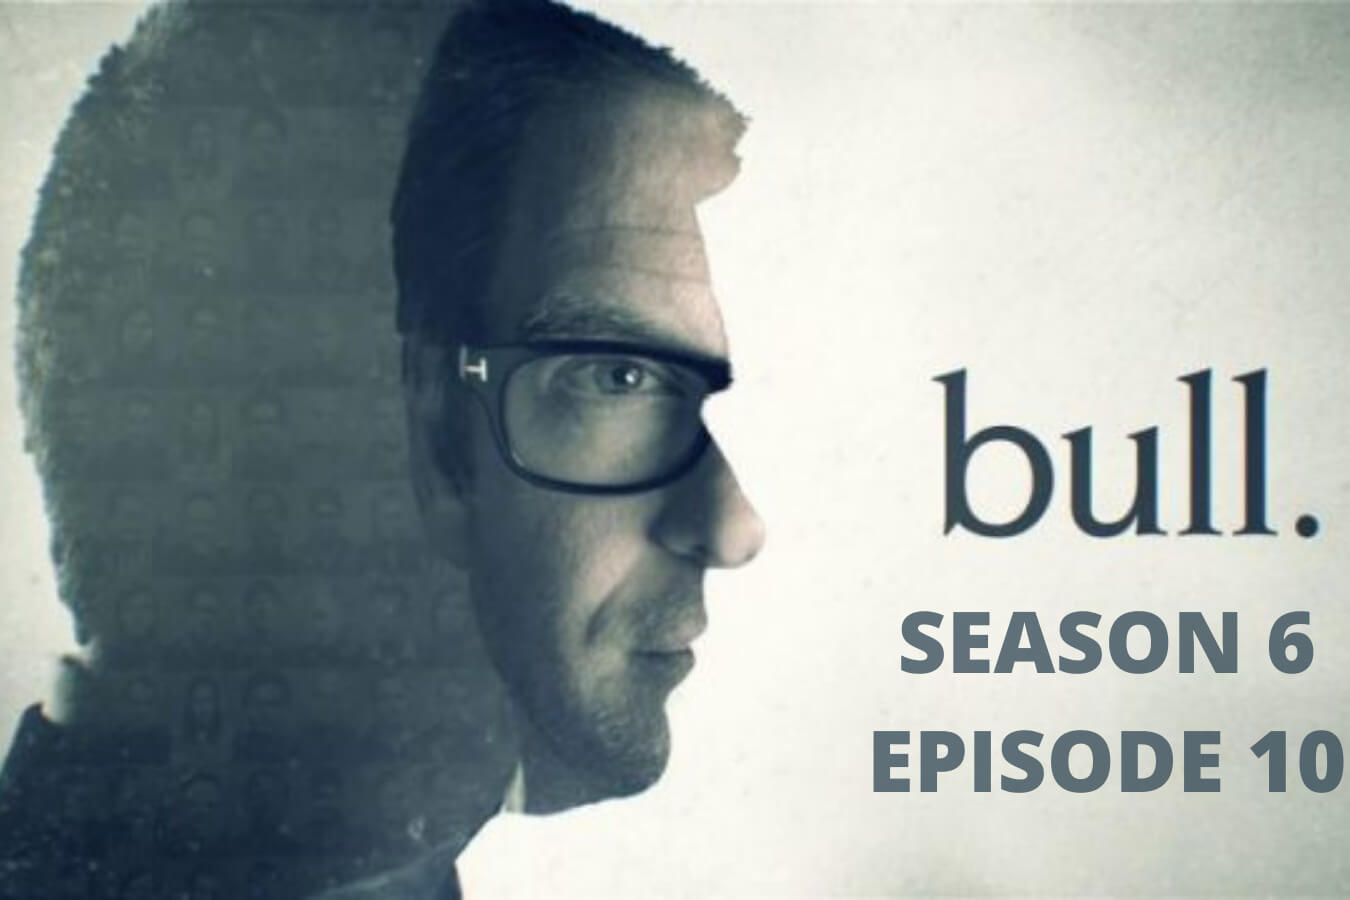 Will There be any Updates on Bull Season 6 episodes 10 Trailer?